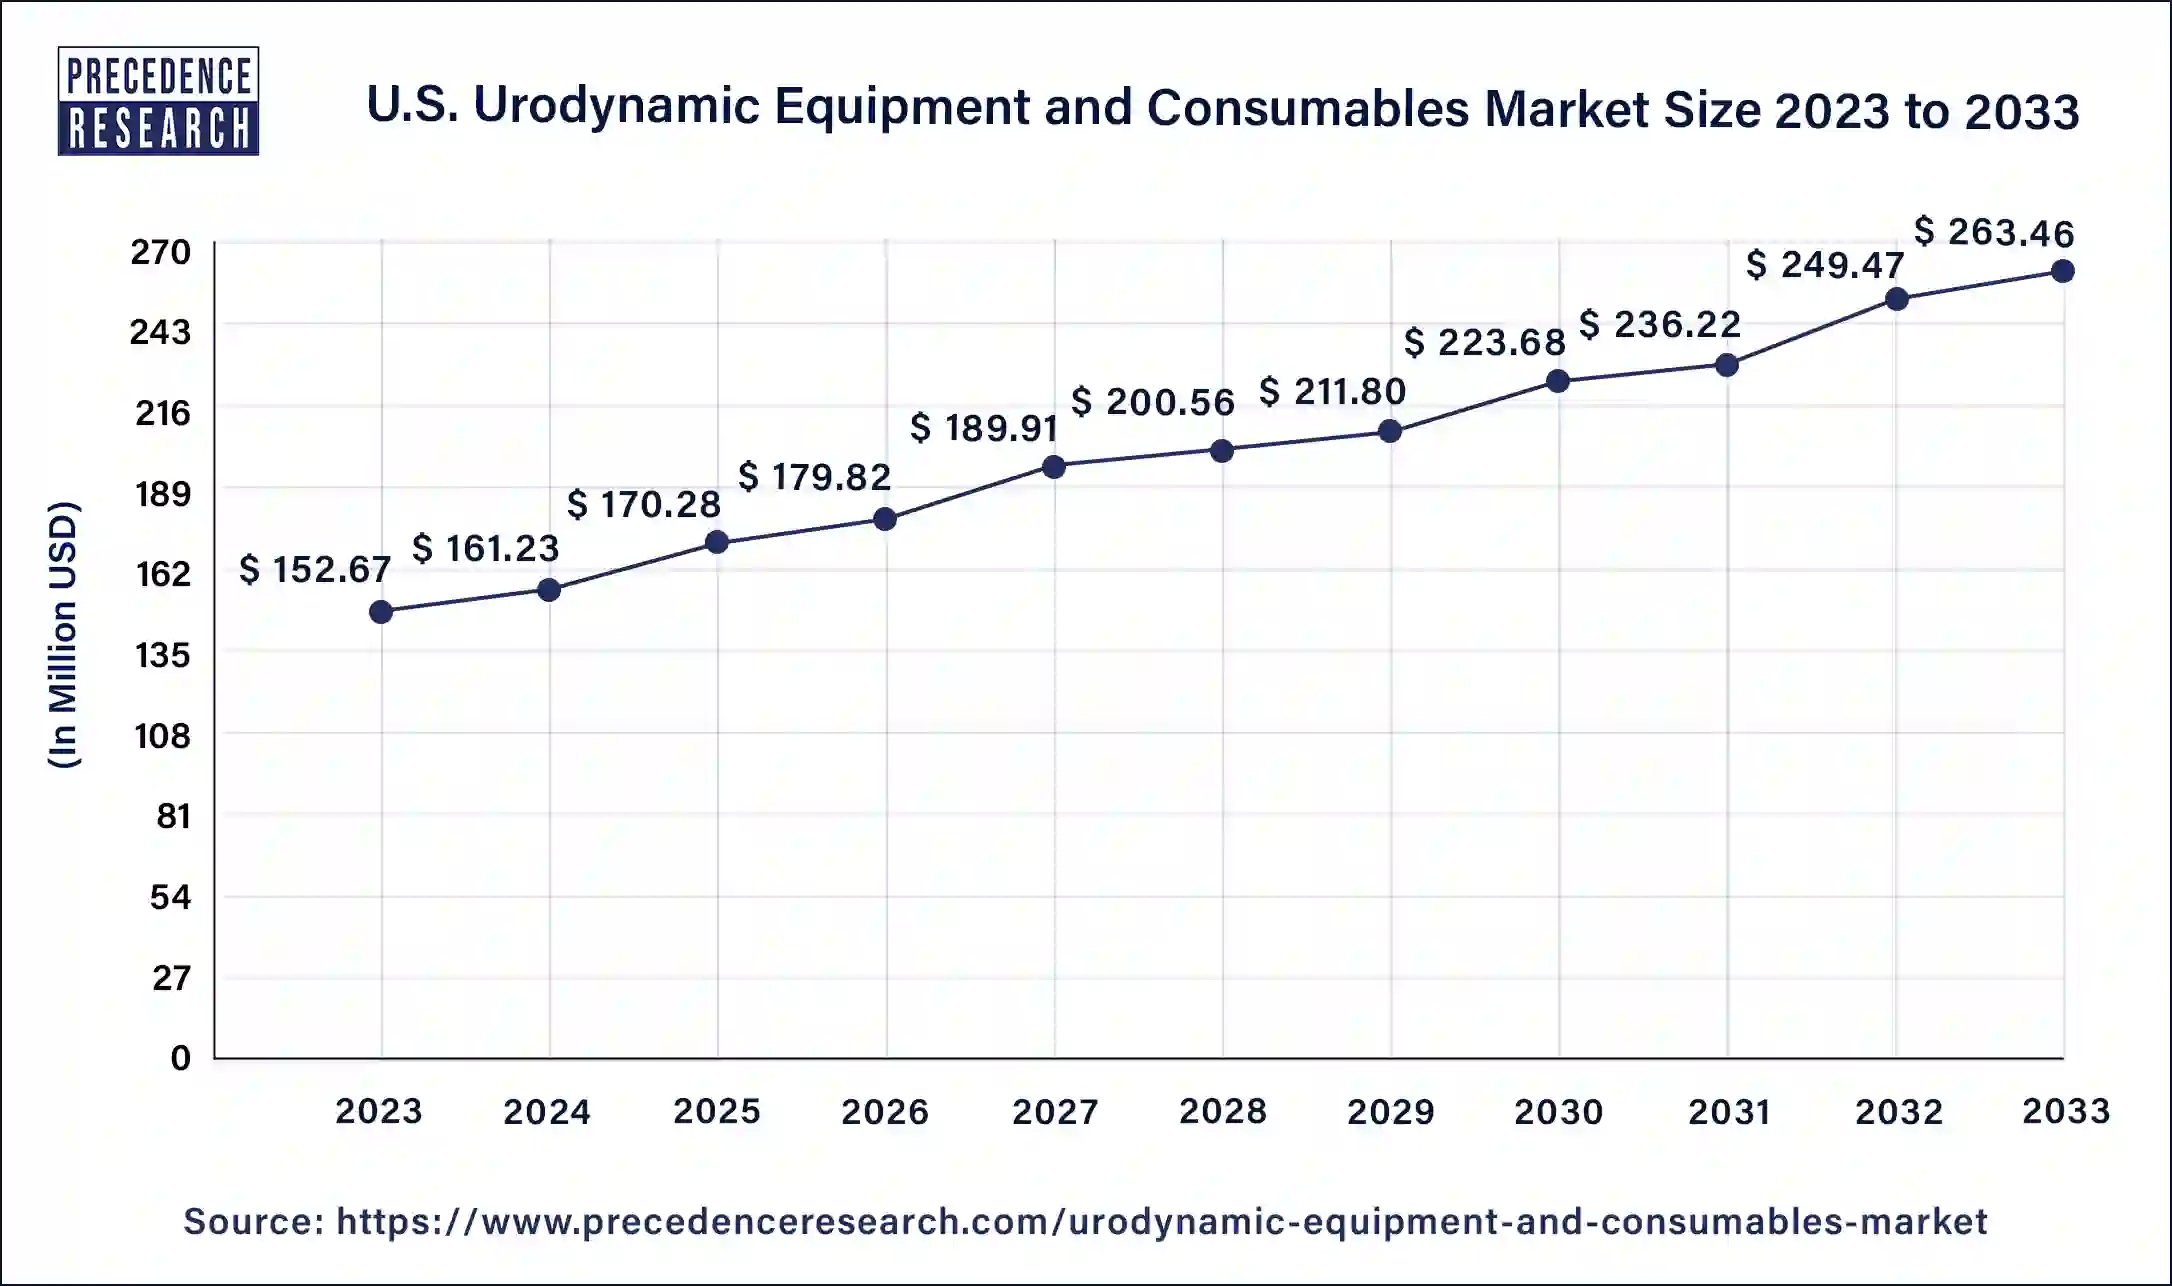 U.S. Urodynamic Equipment and Consumables Market Size 2024 to 2033